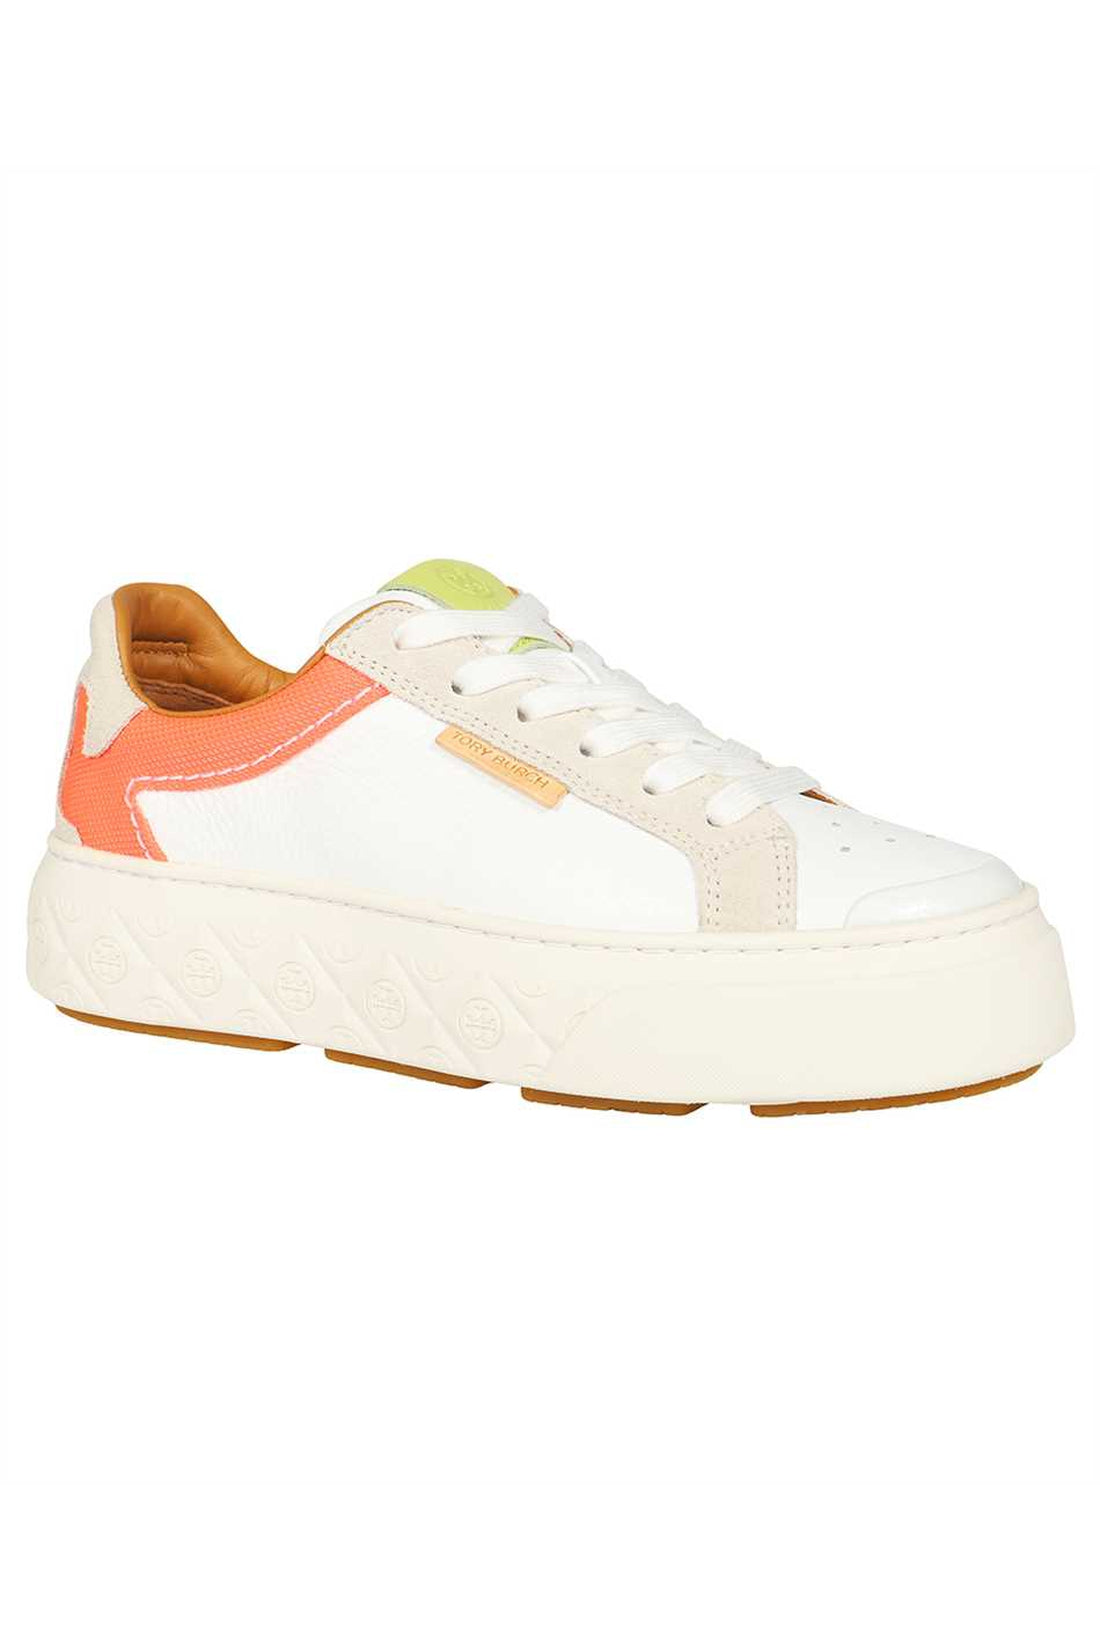 Tory Burch-OUTLET-SALE-Ladybug low-top sneakers-ARCHIVIST